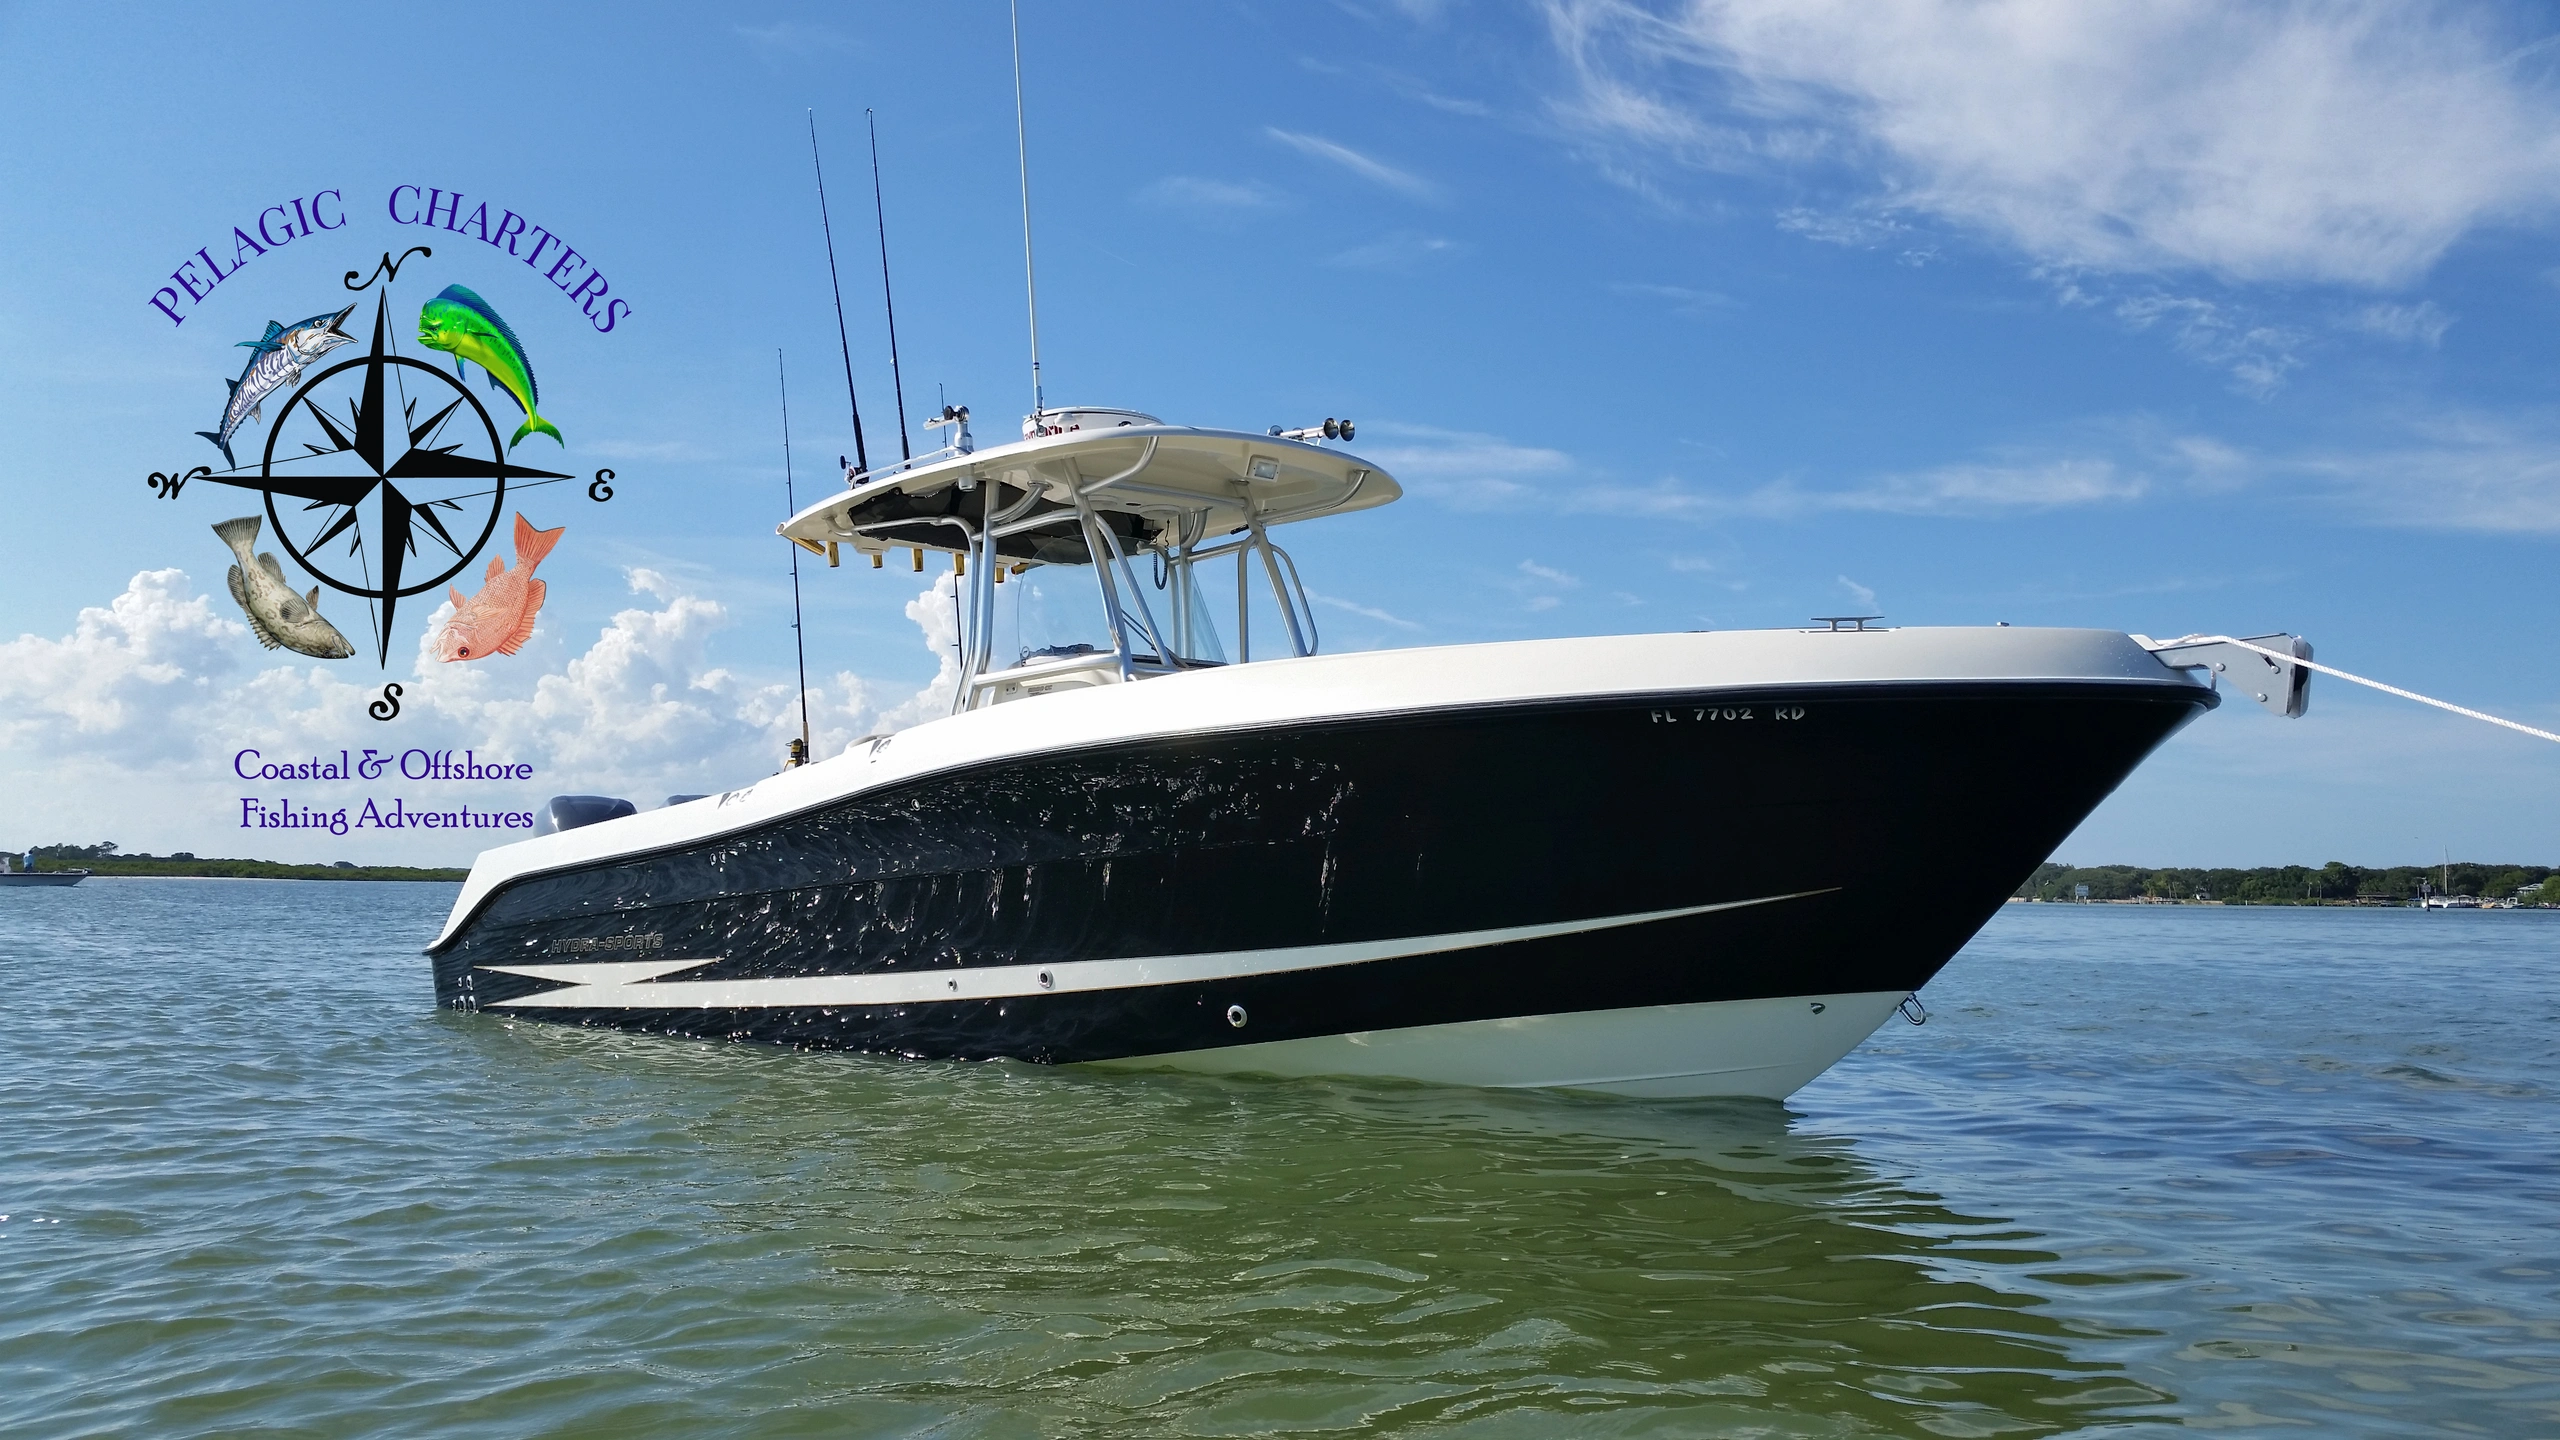 Pelagic Charters - Fishing, Charters in Ponce Inlet, Charters